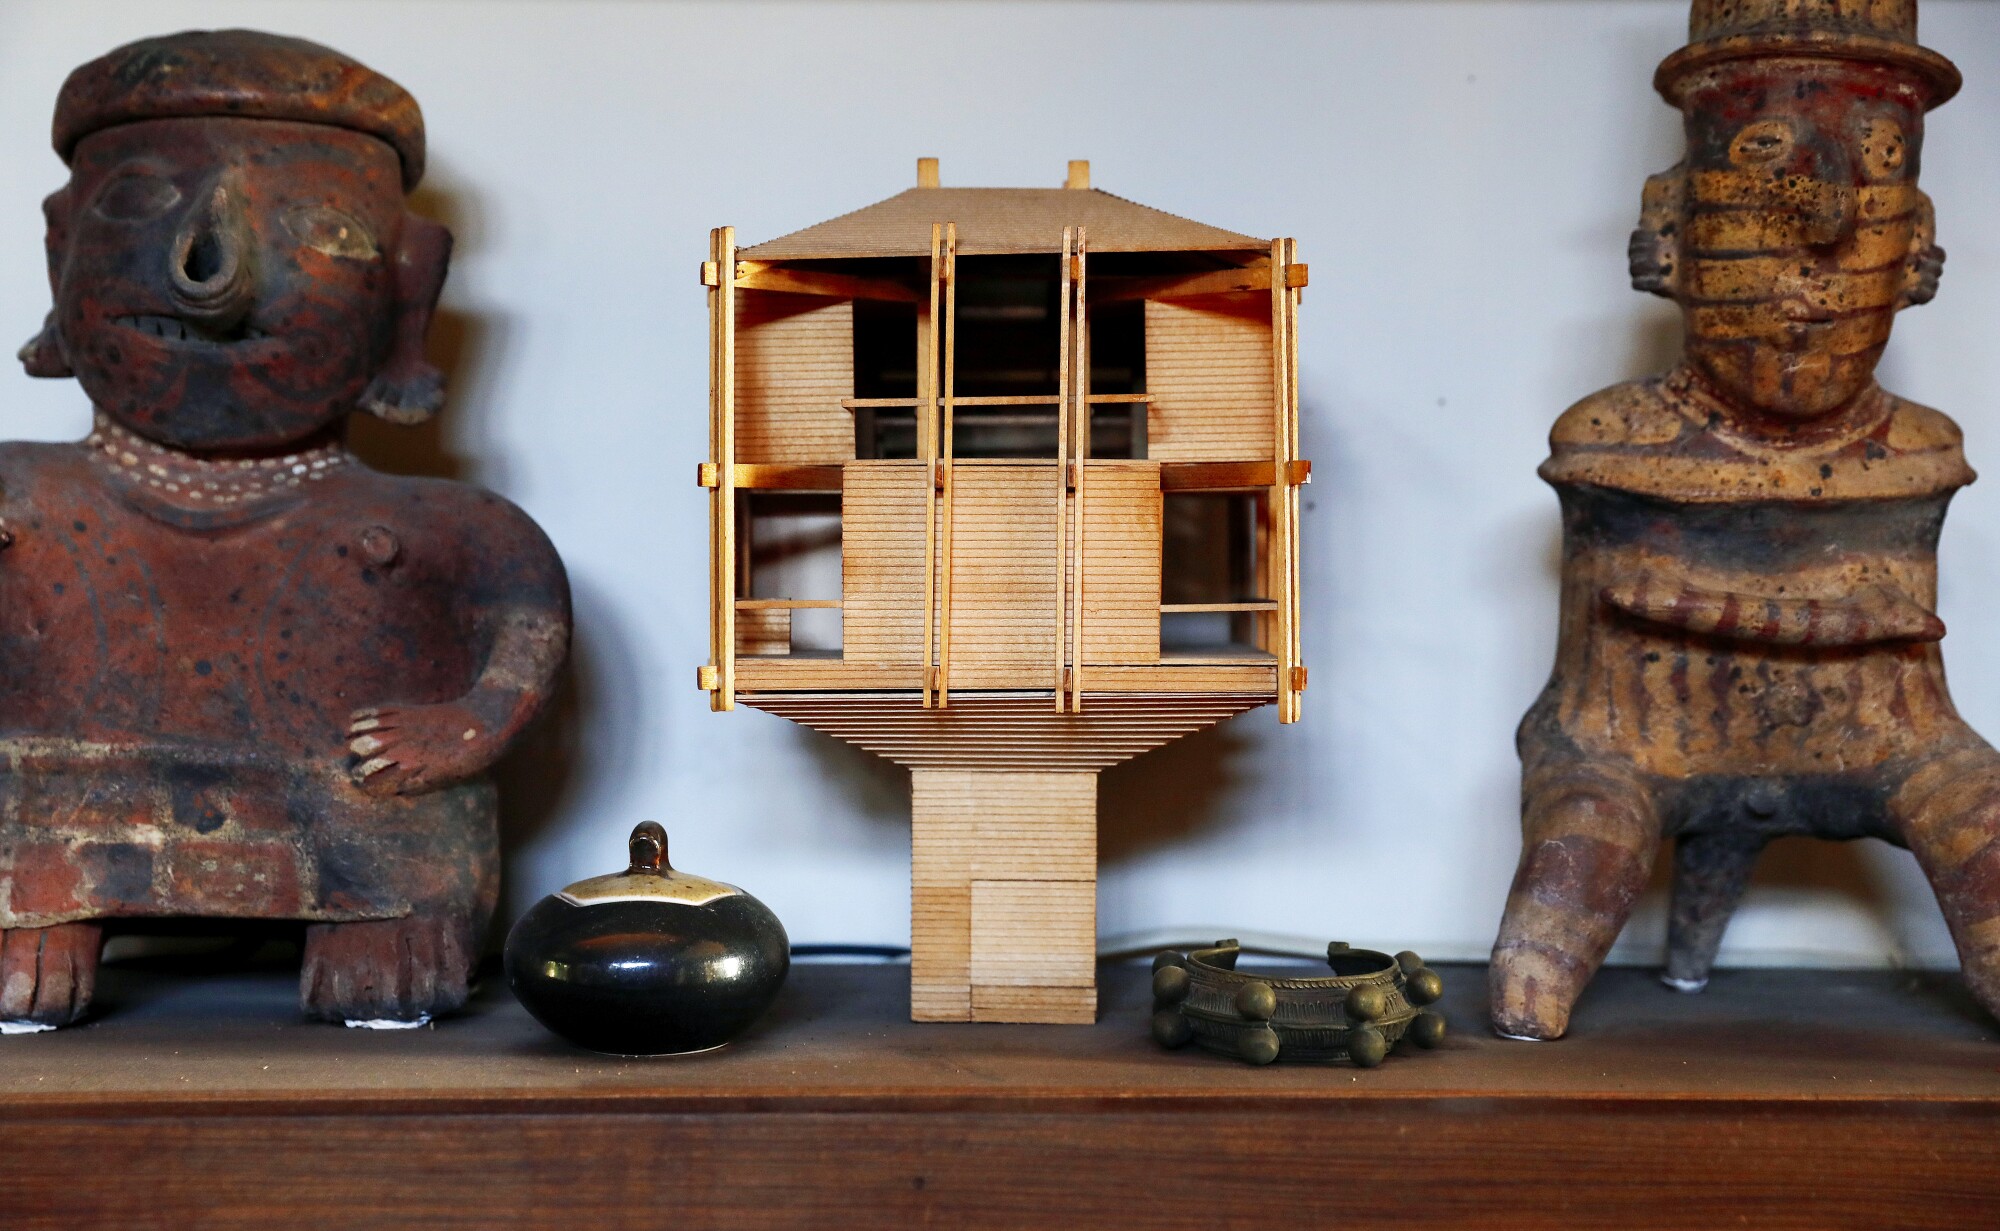 The wooden model of Bernard Judge's cabin sits on a shelf between pre-Columbian-style figurines